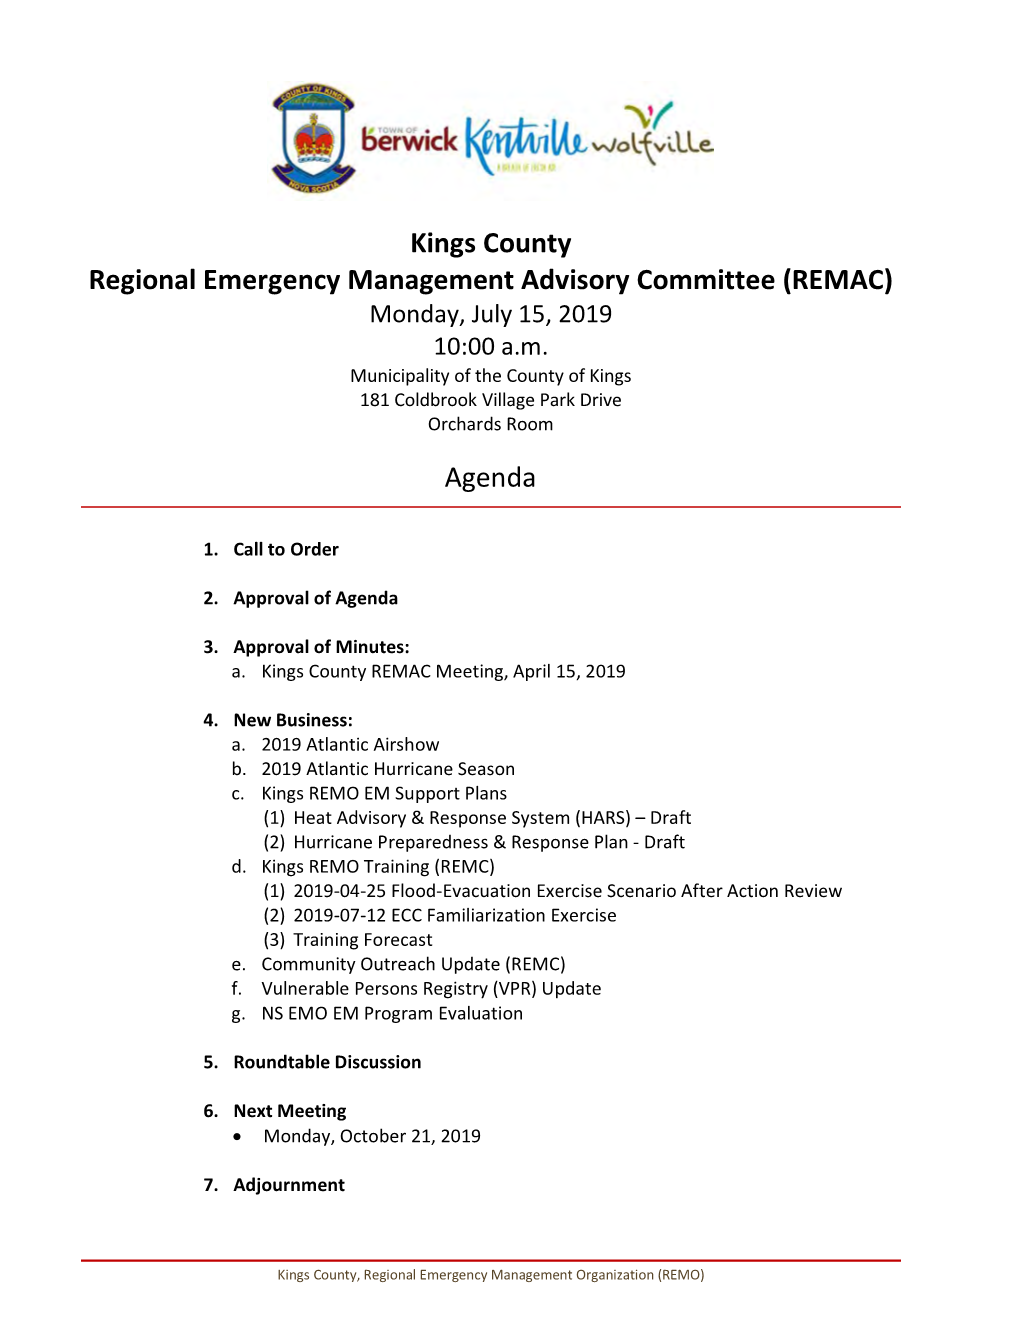 Kings County Regional Emergency Management Advisory Committee (REMAC) Monday, July 15, 2019 10:00 A.M